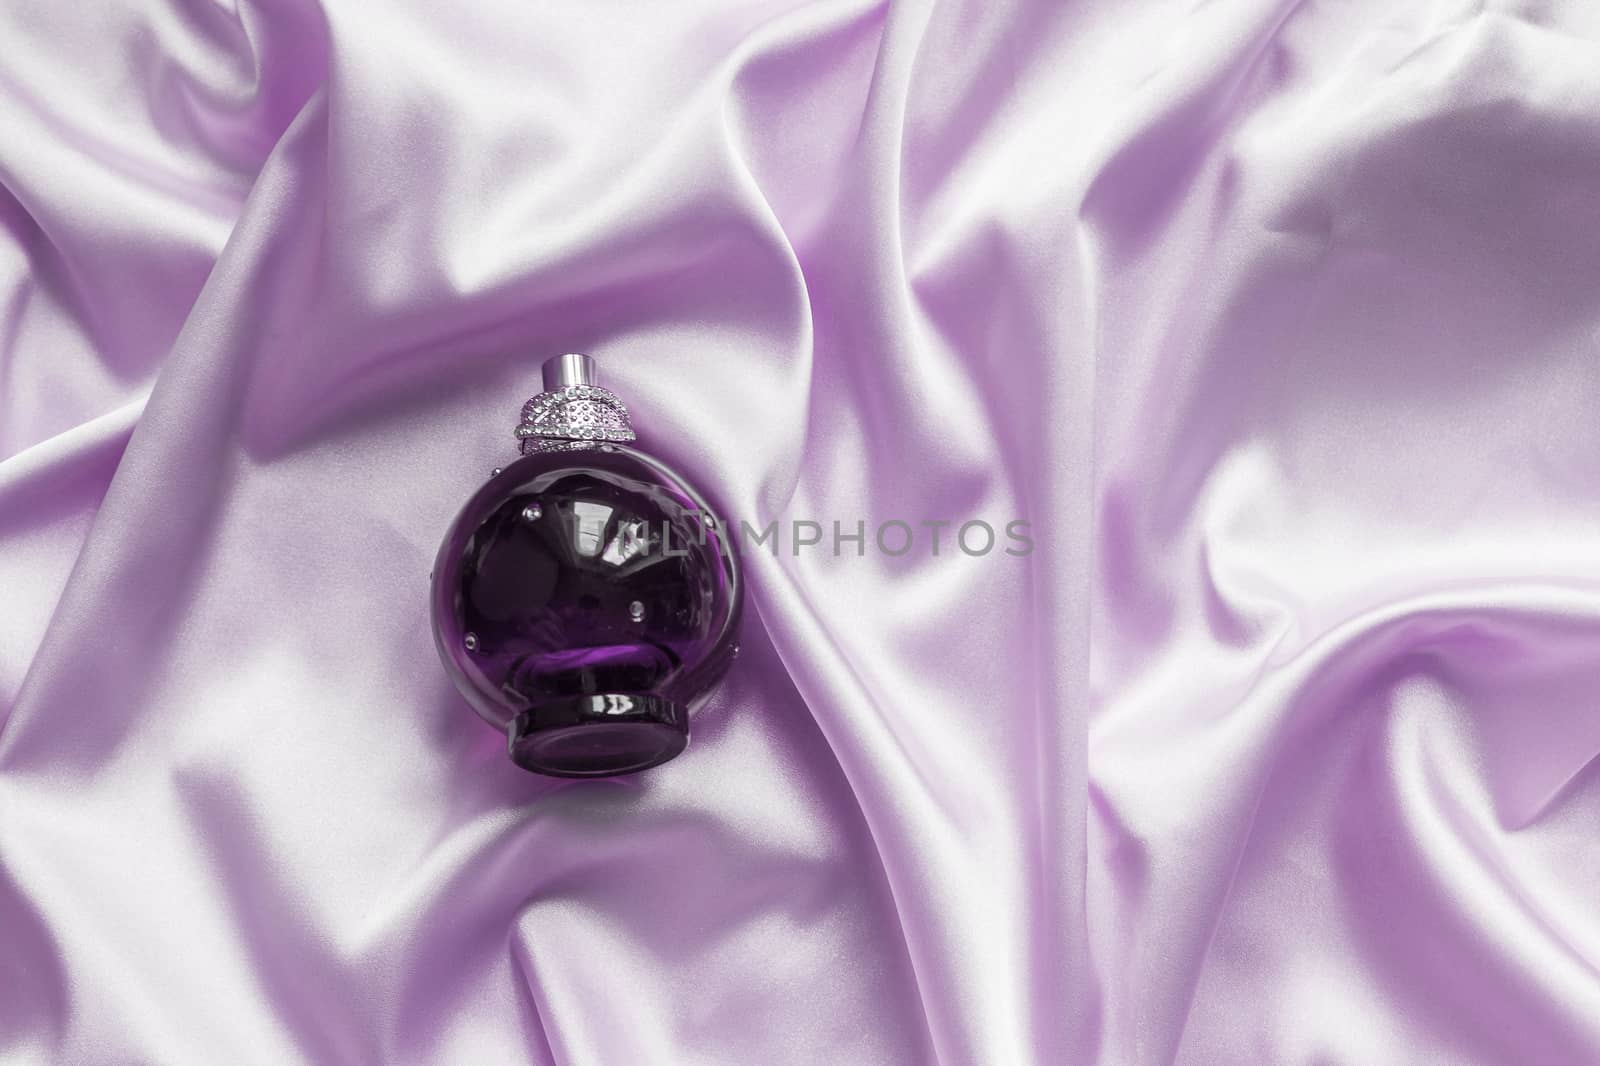 Perfume bottle on lilac silk folded fabric background. Luxery Scent fragrance cosmetic beauty product.